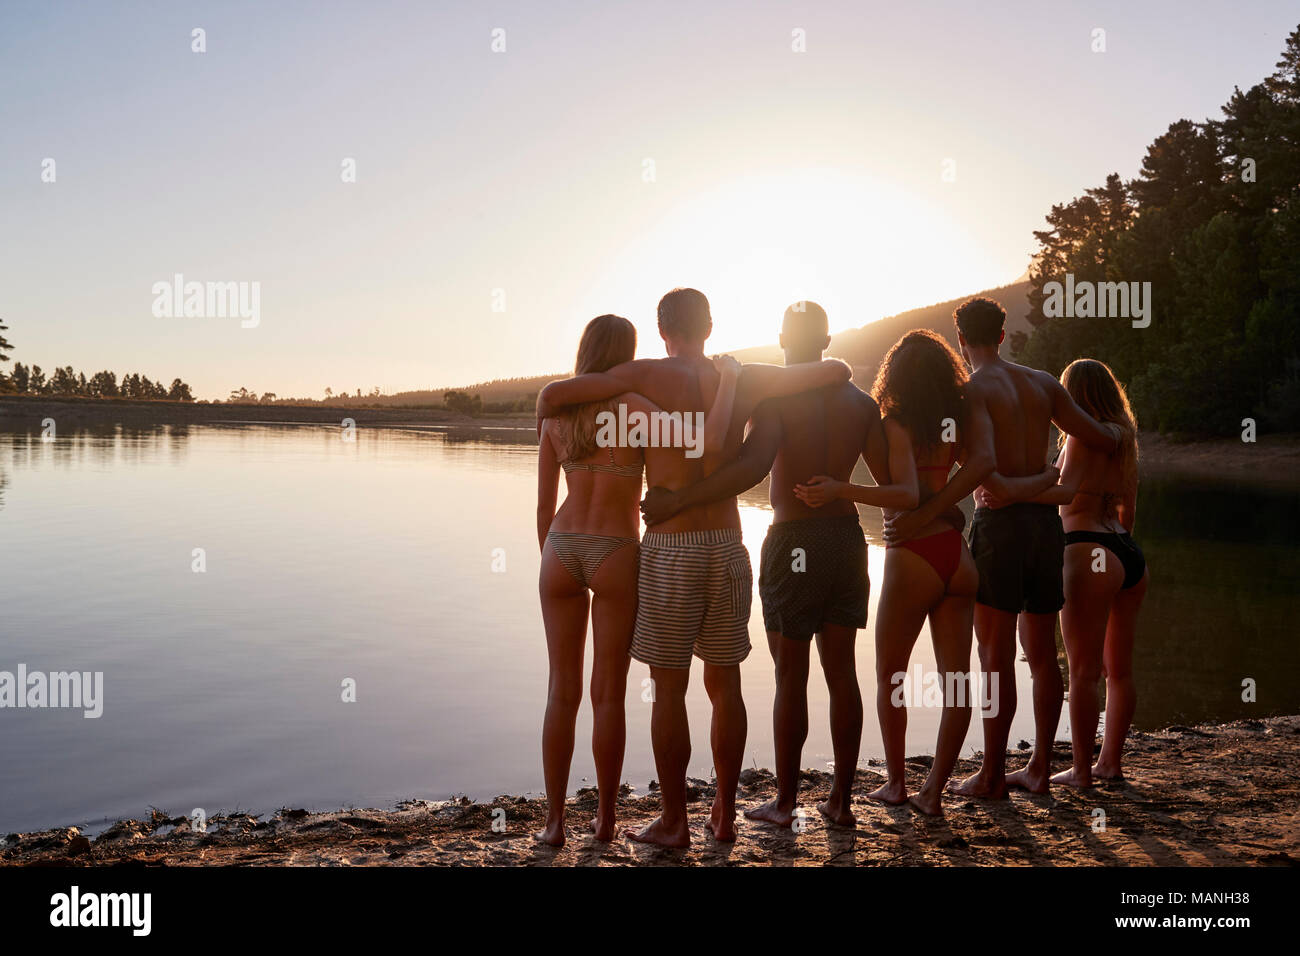 Young adult friends admiring view from lakeshore, back view Stock Photo